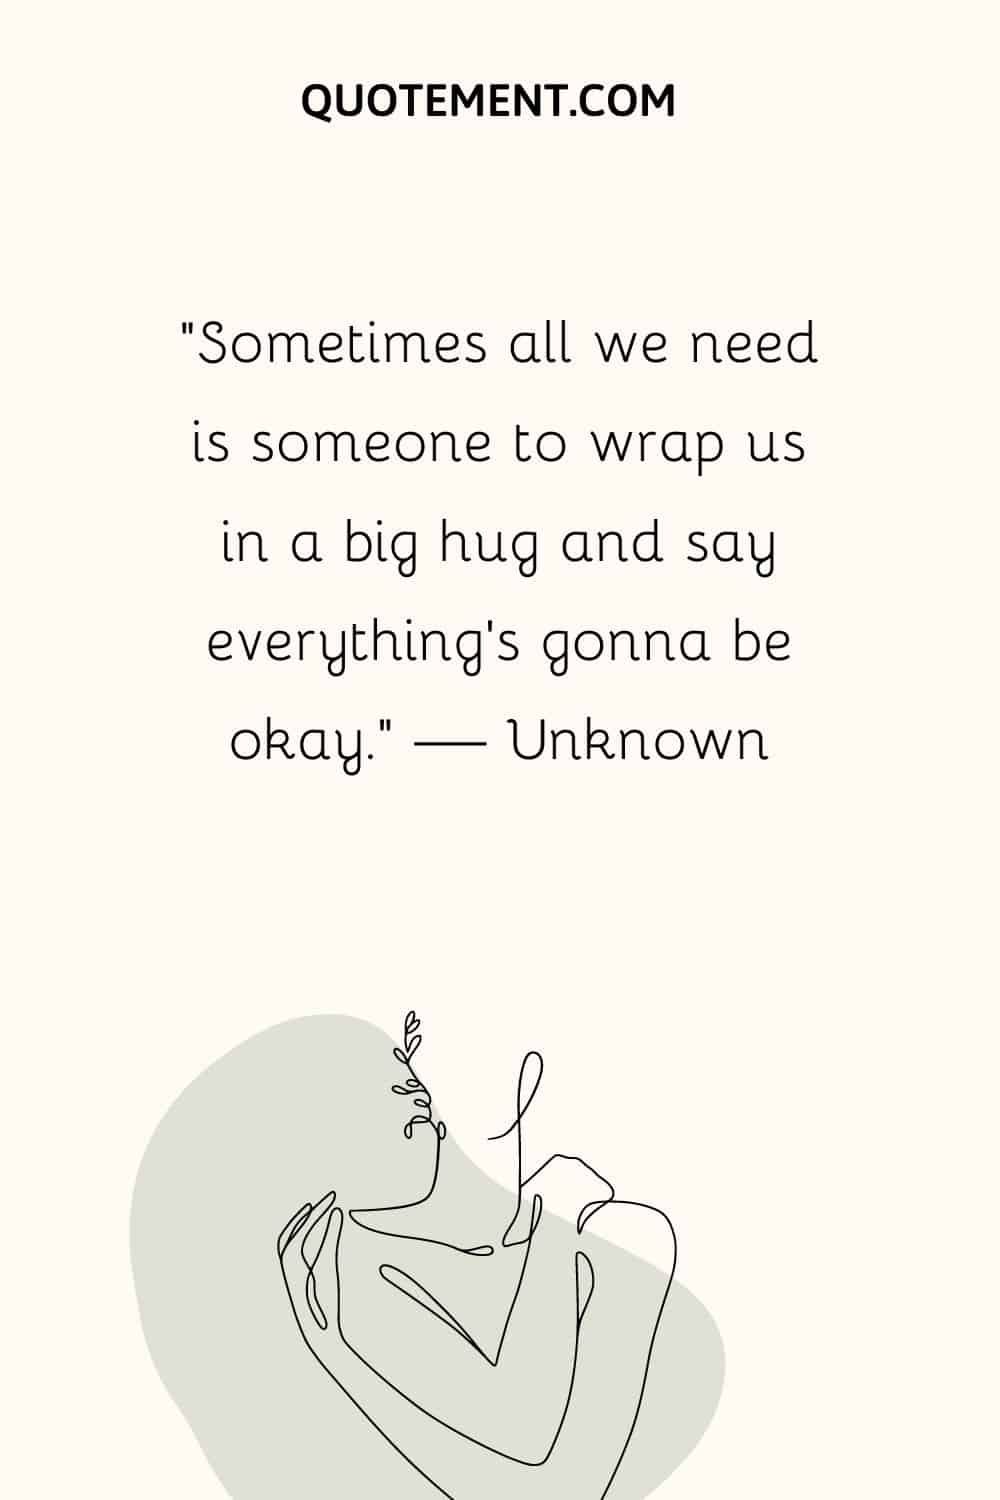 “Sometimes all we need is someone to wrap us in a big hug and say everything's gonna be okay.” — Unknown